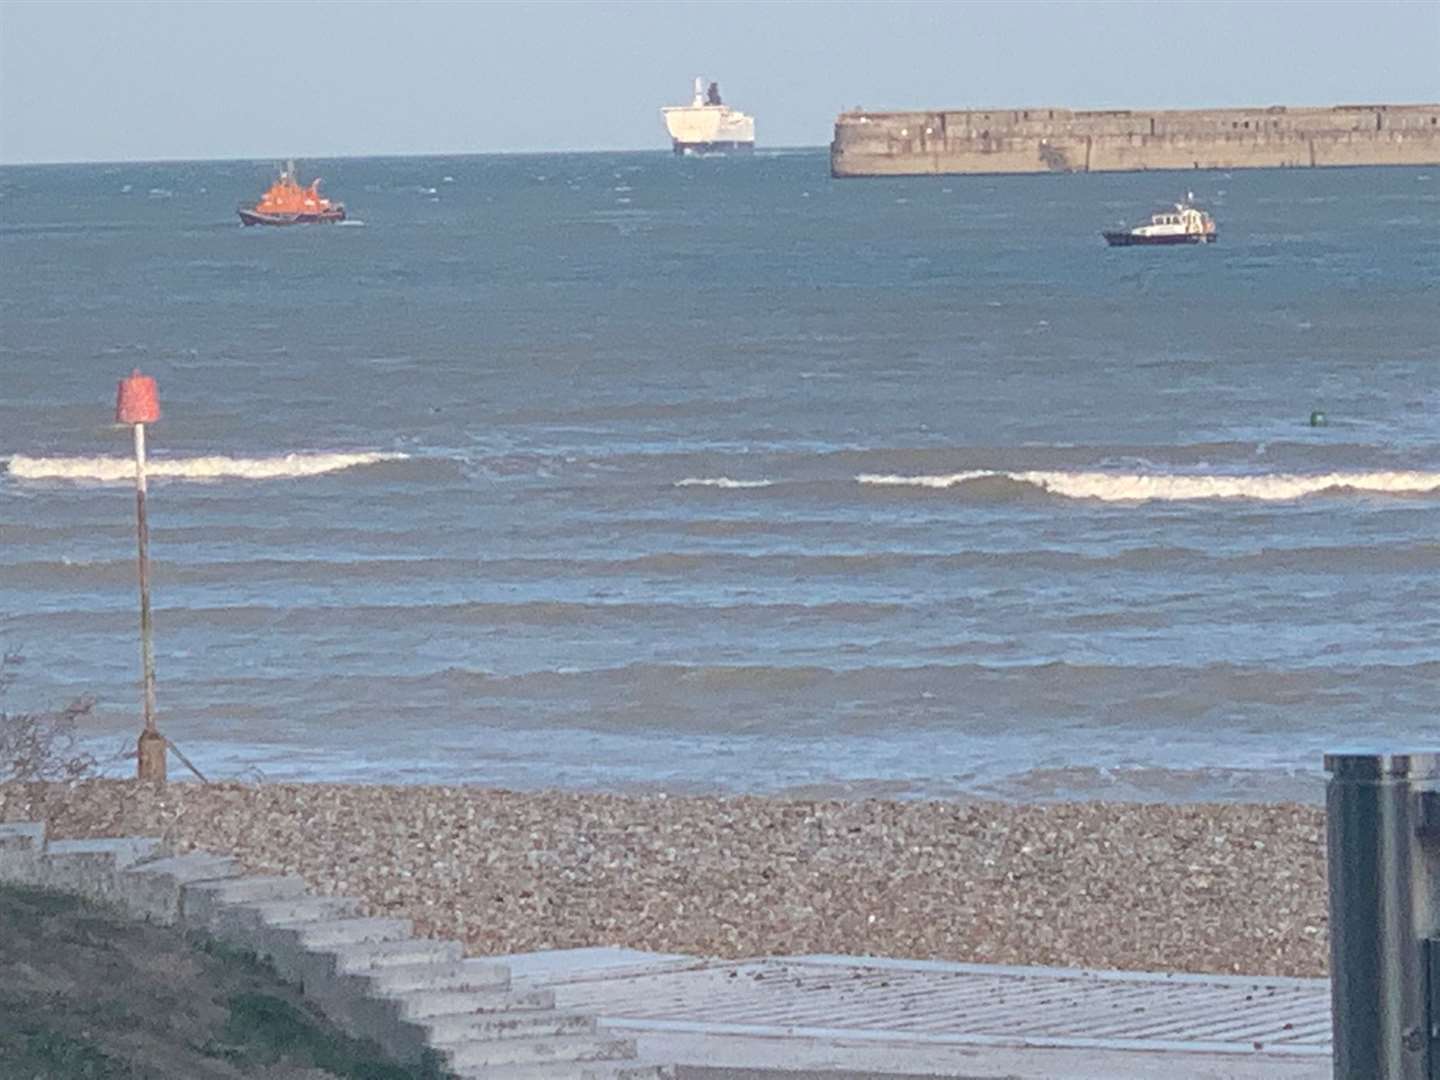 Coastguard boats are searching the harbour. Photo: LKJc